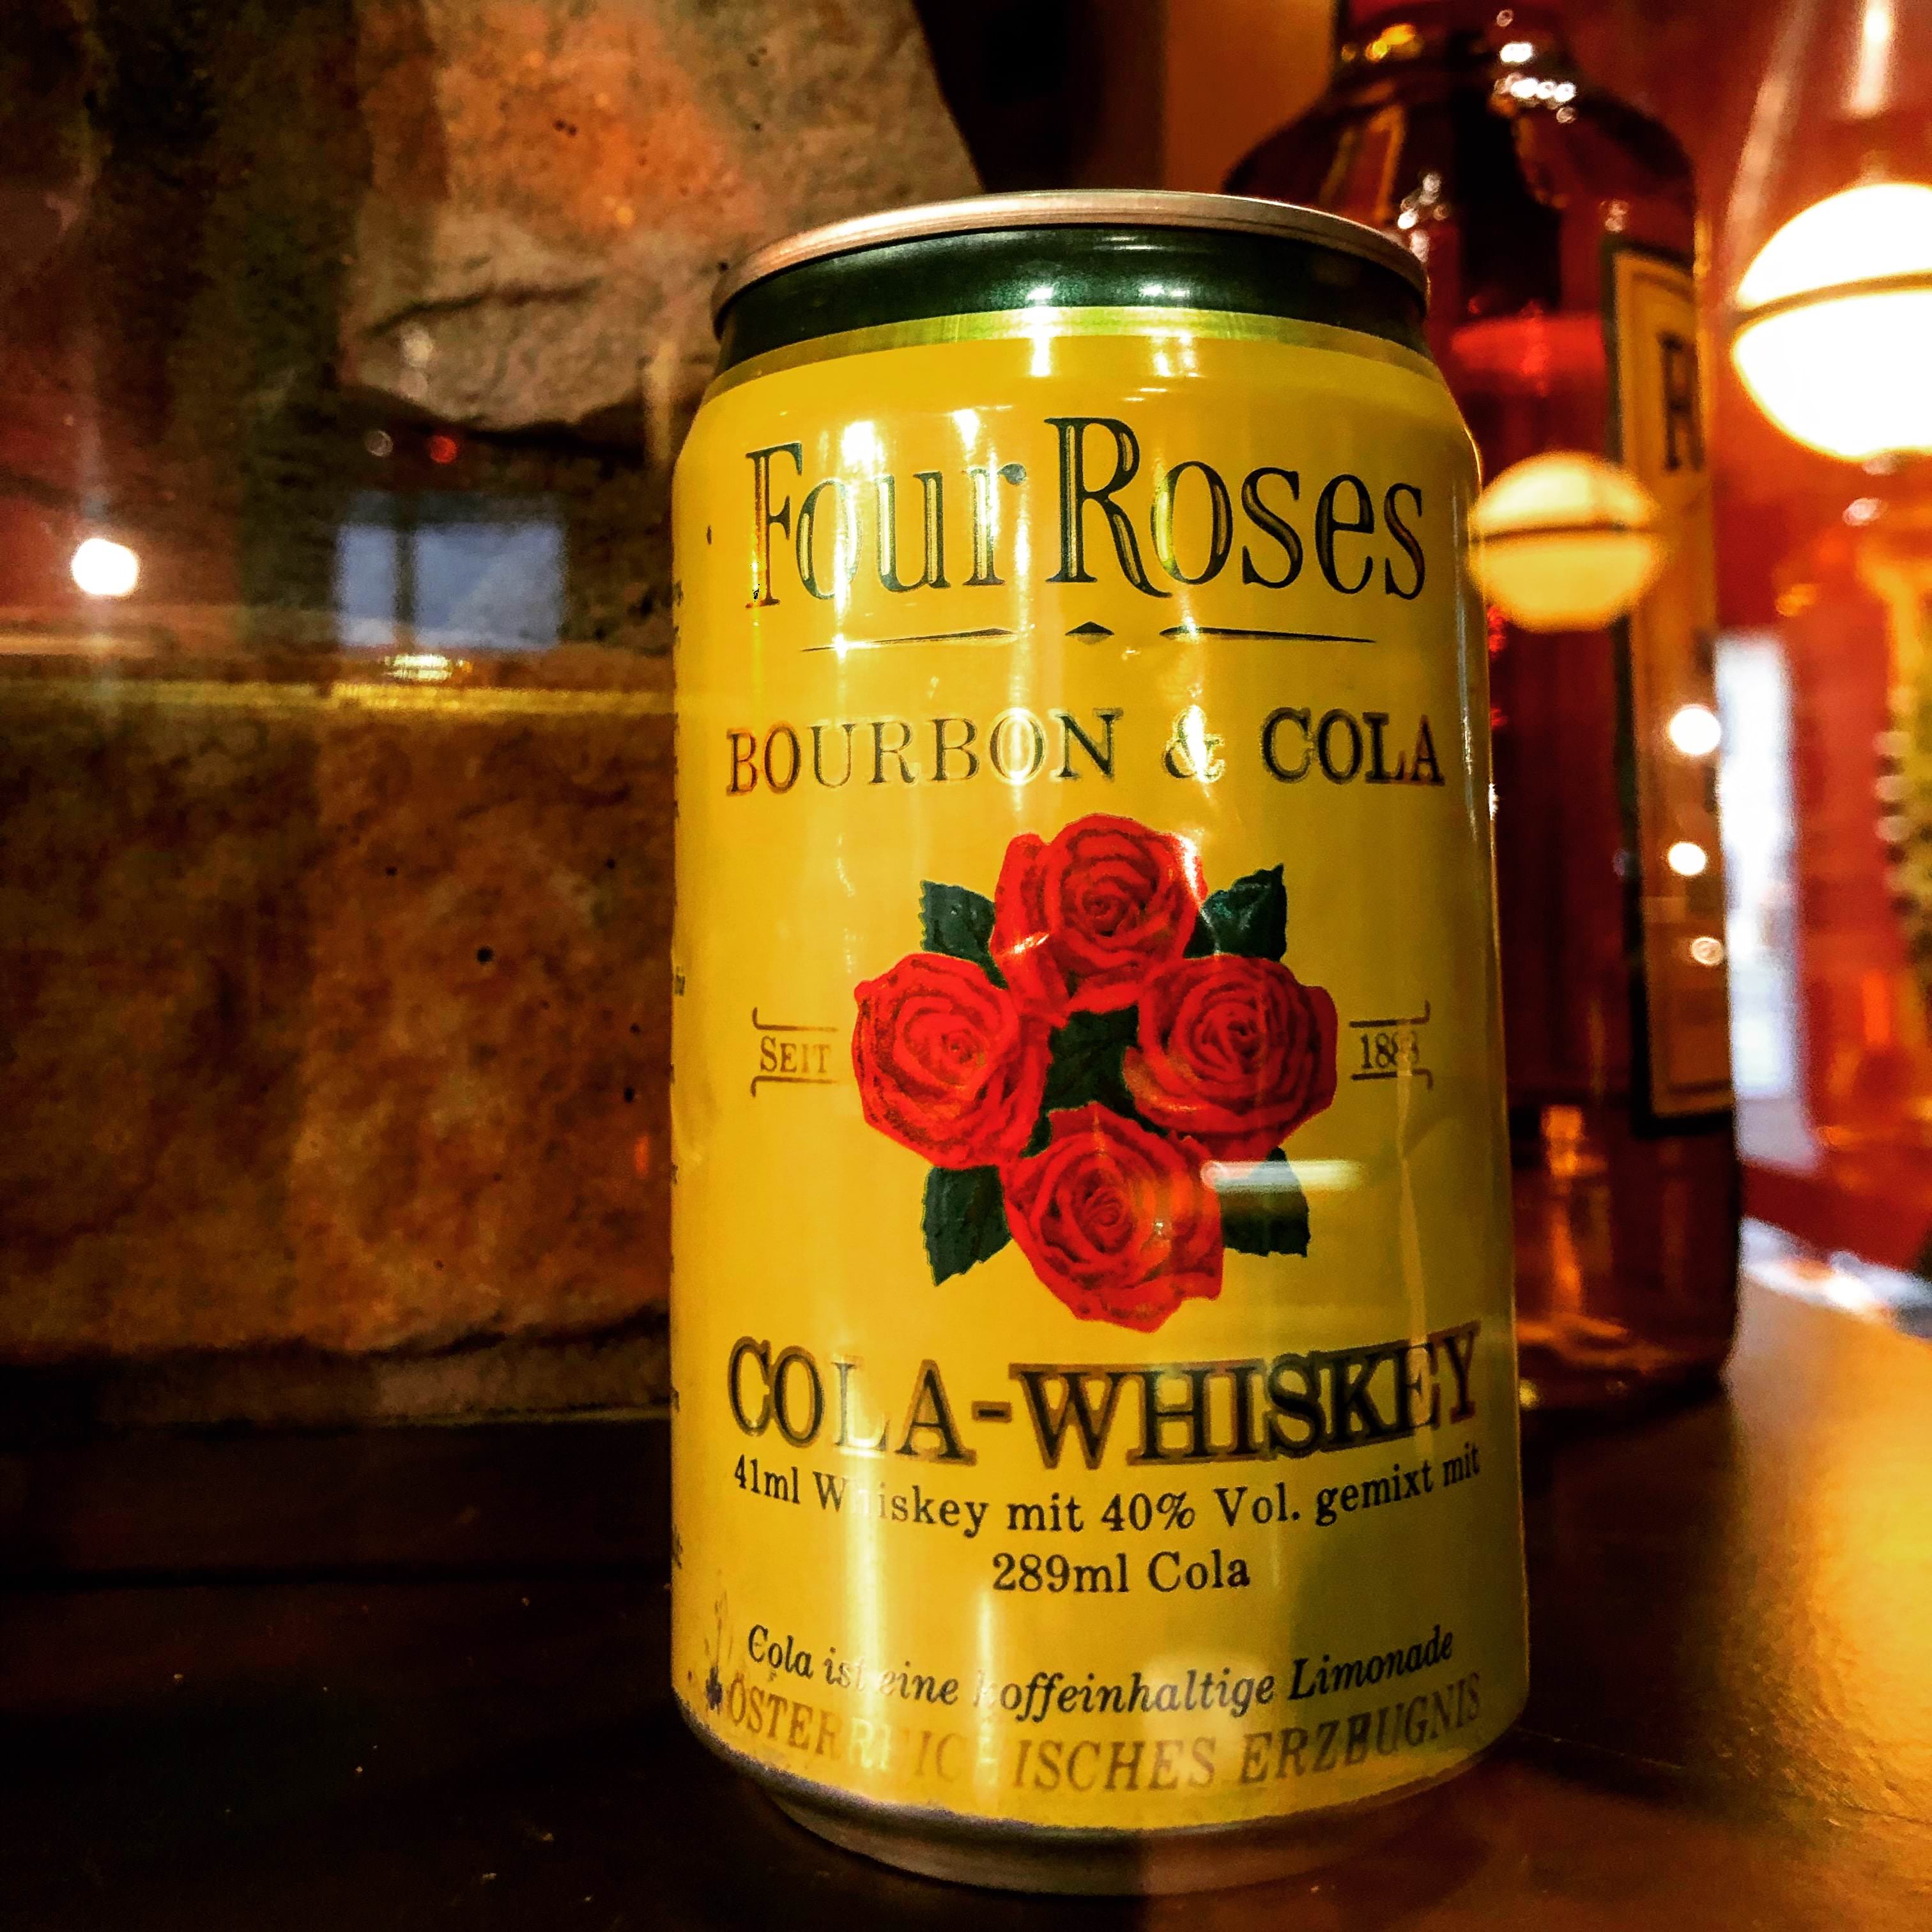 Archival bourbon and cola at Four Roses